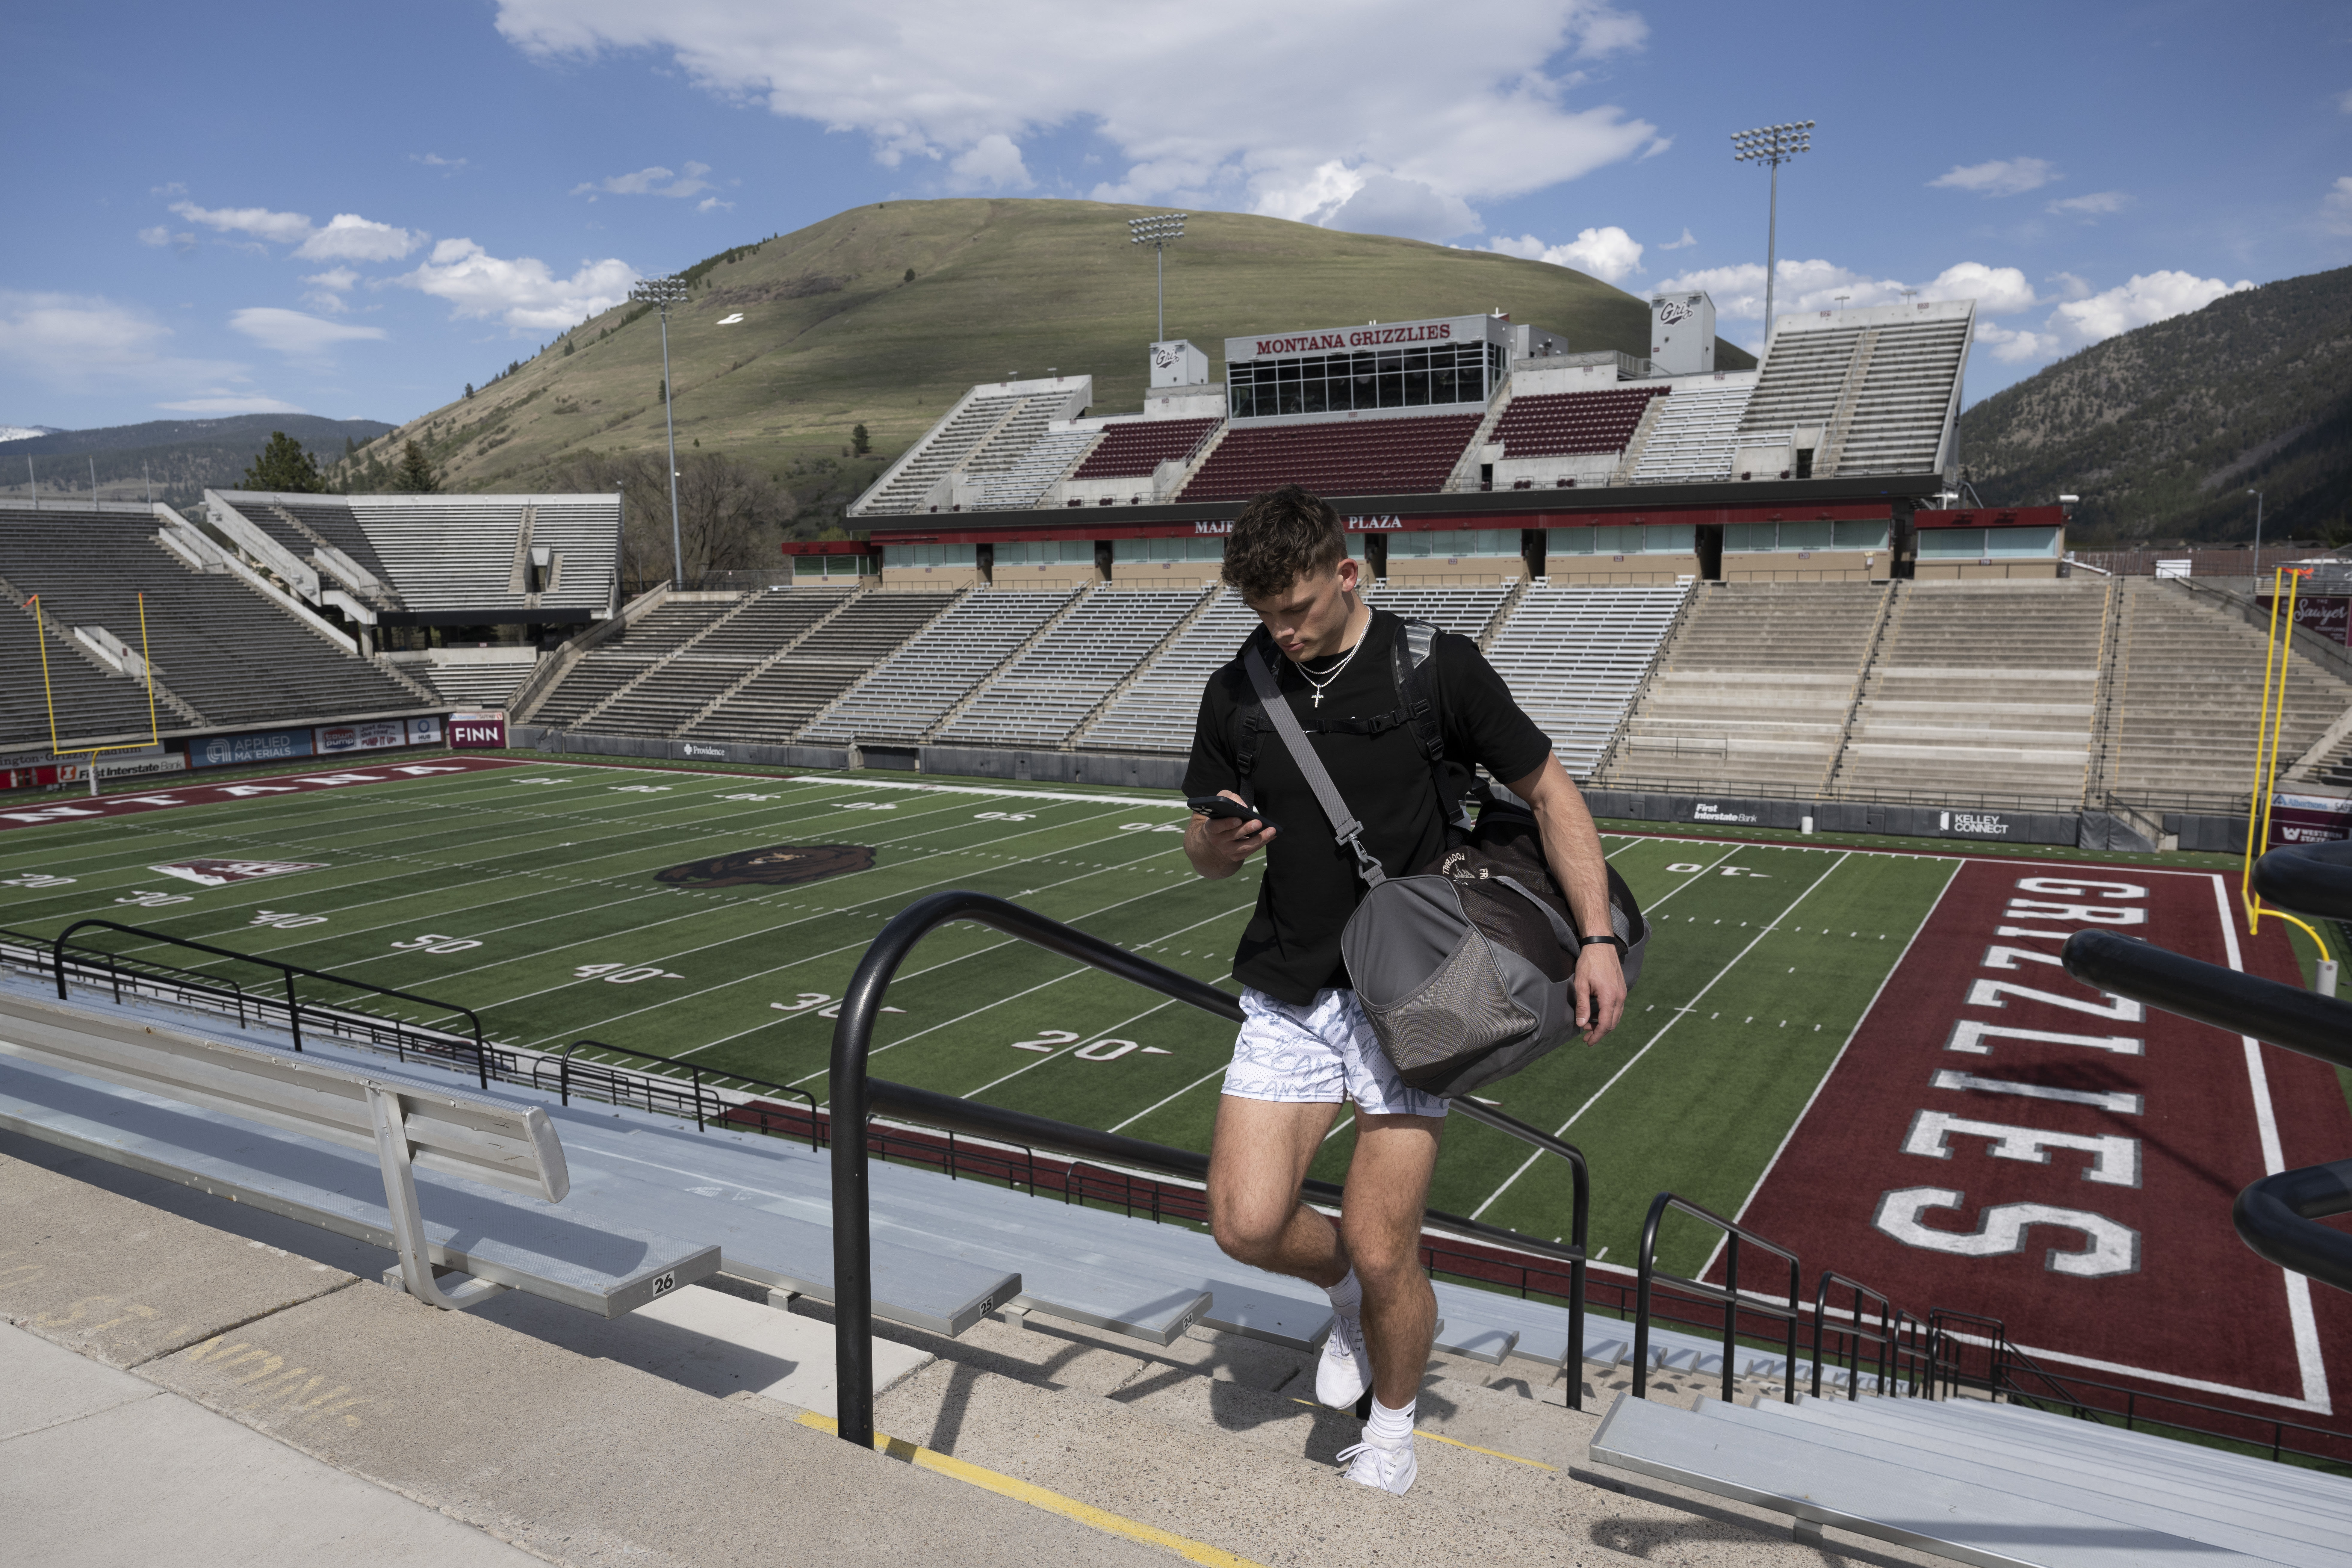 Adam Botkin, a football TikTok influencer, uses his phone after recording a video for a post at Washington-Grizzly Stadium in Missoula, Mont.